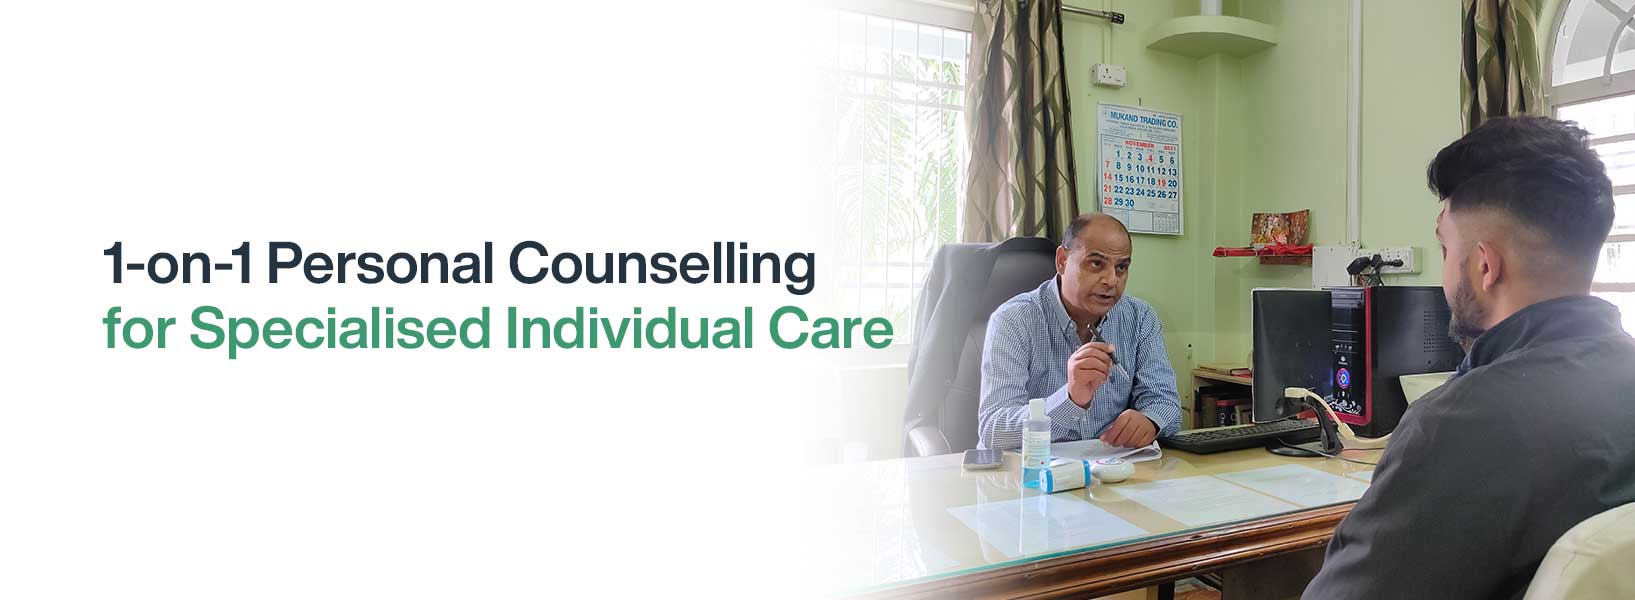 1-on-1 Personal Counselling for Specialised Individual Care